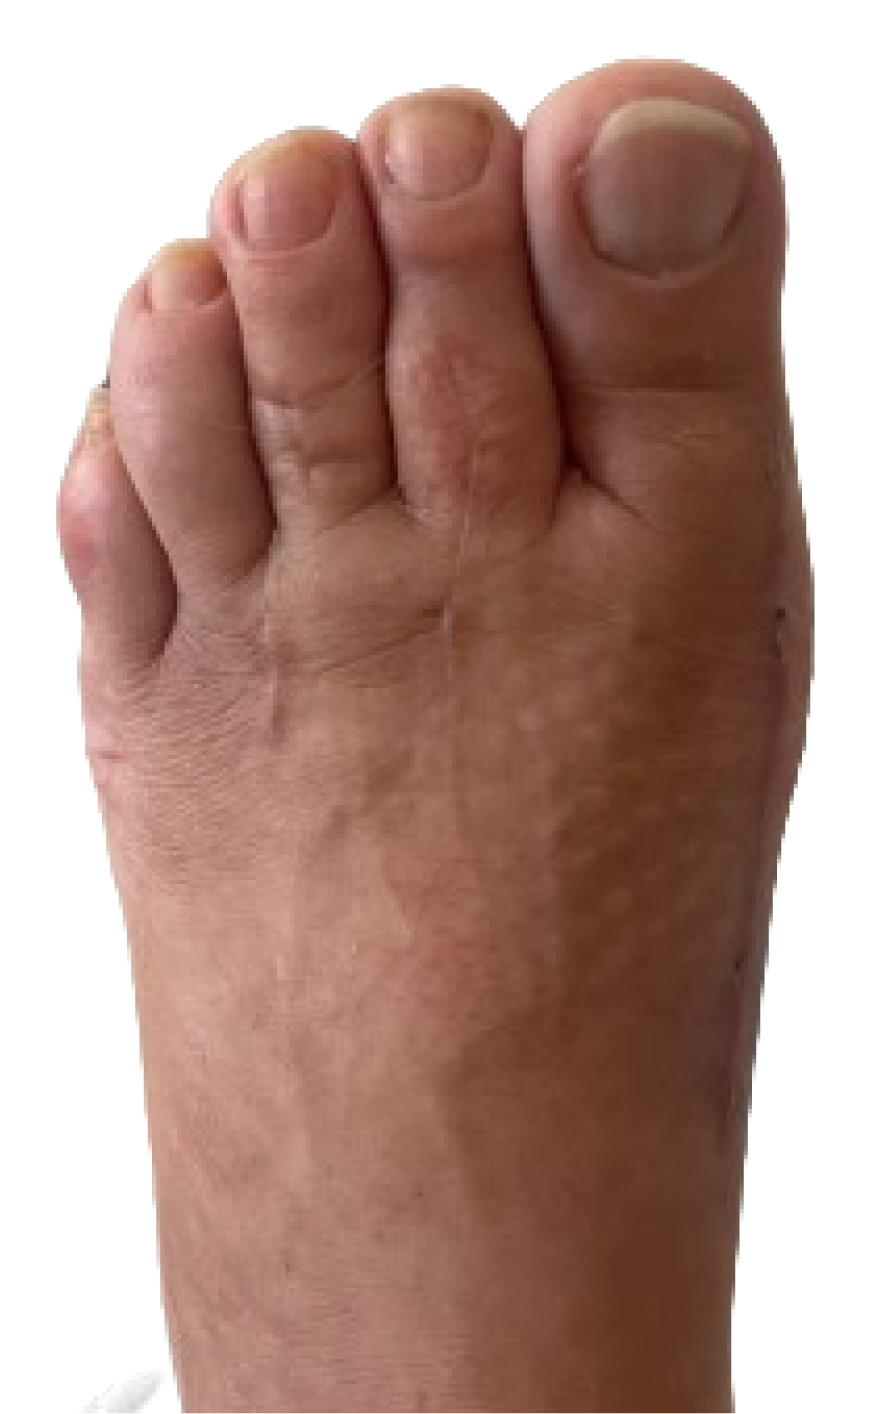 After Bunion and toe correction surgery